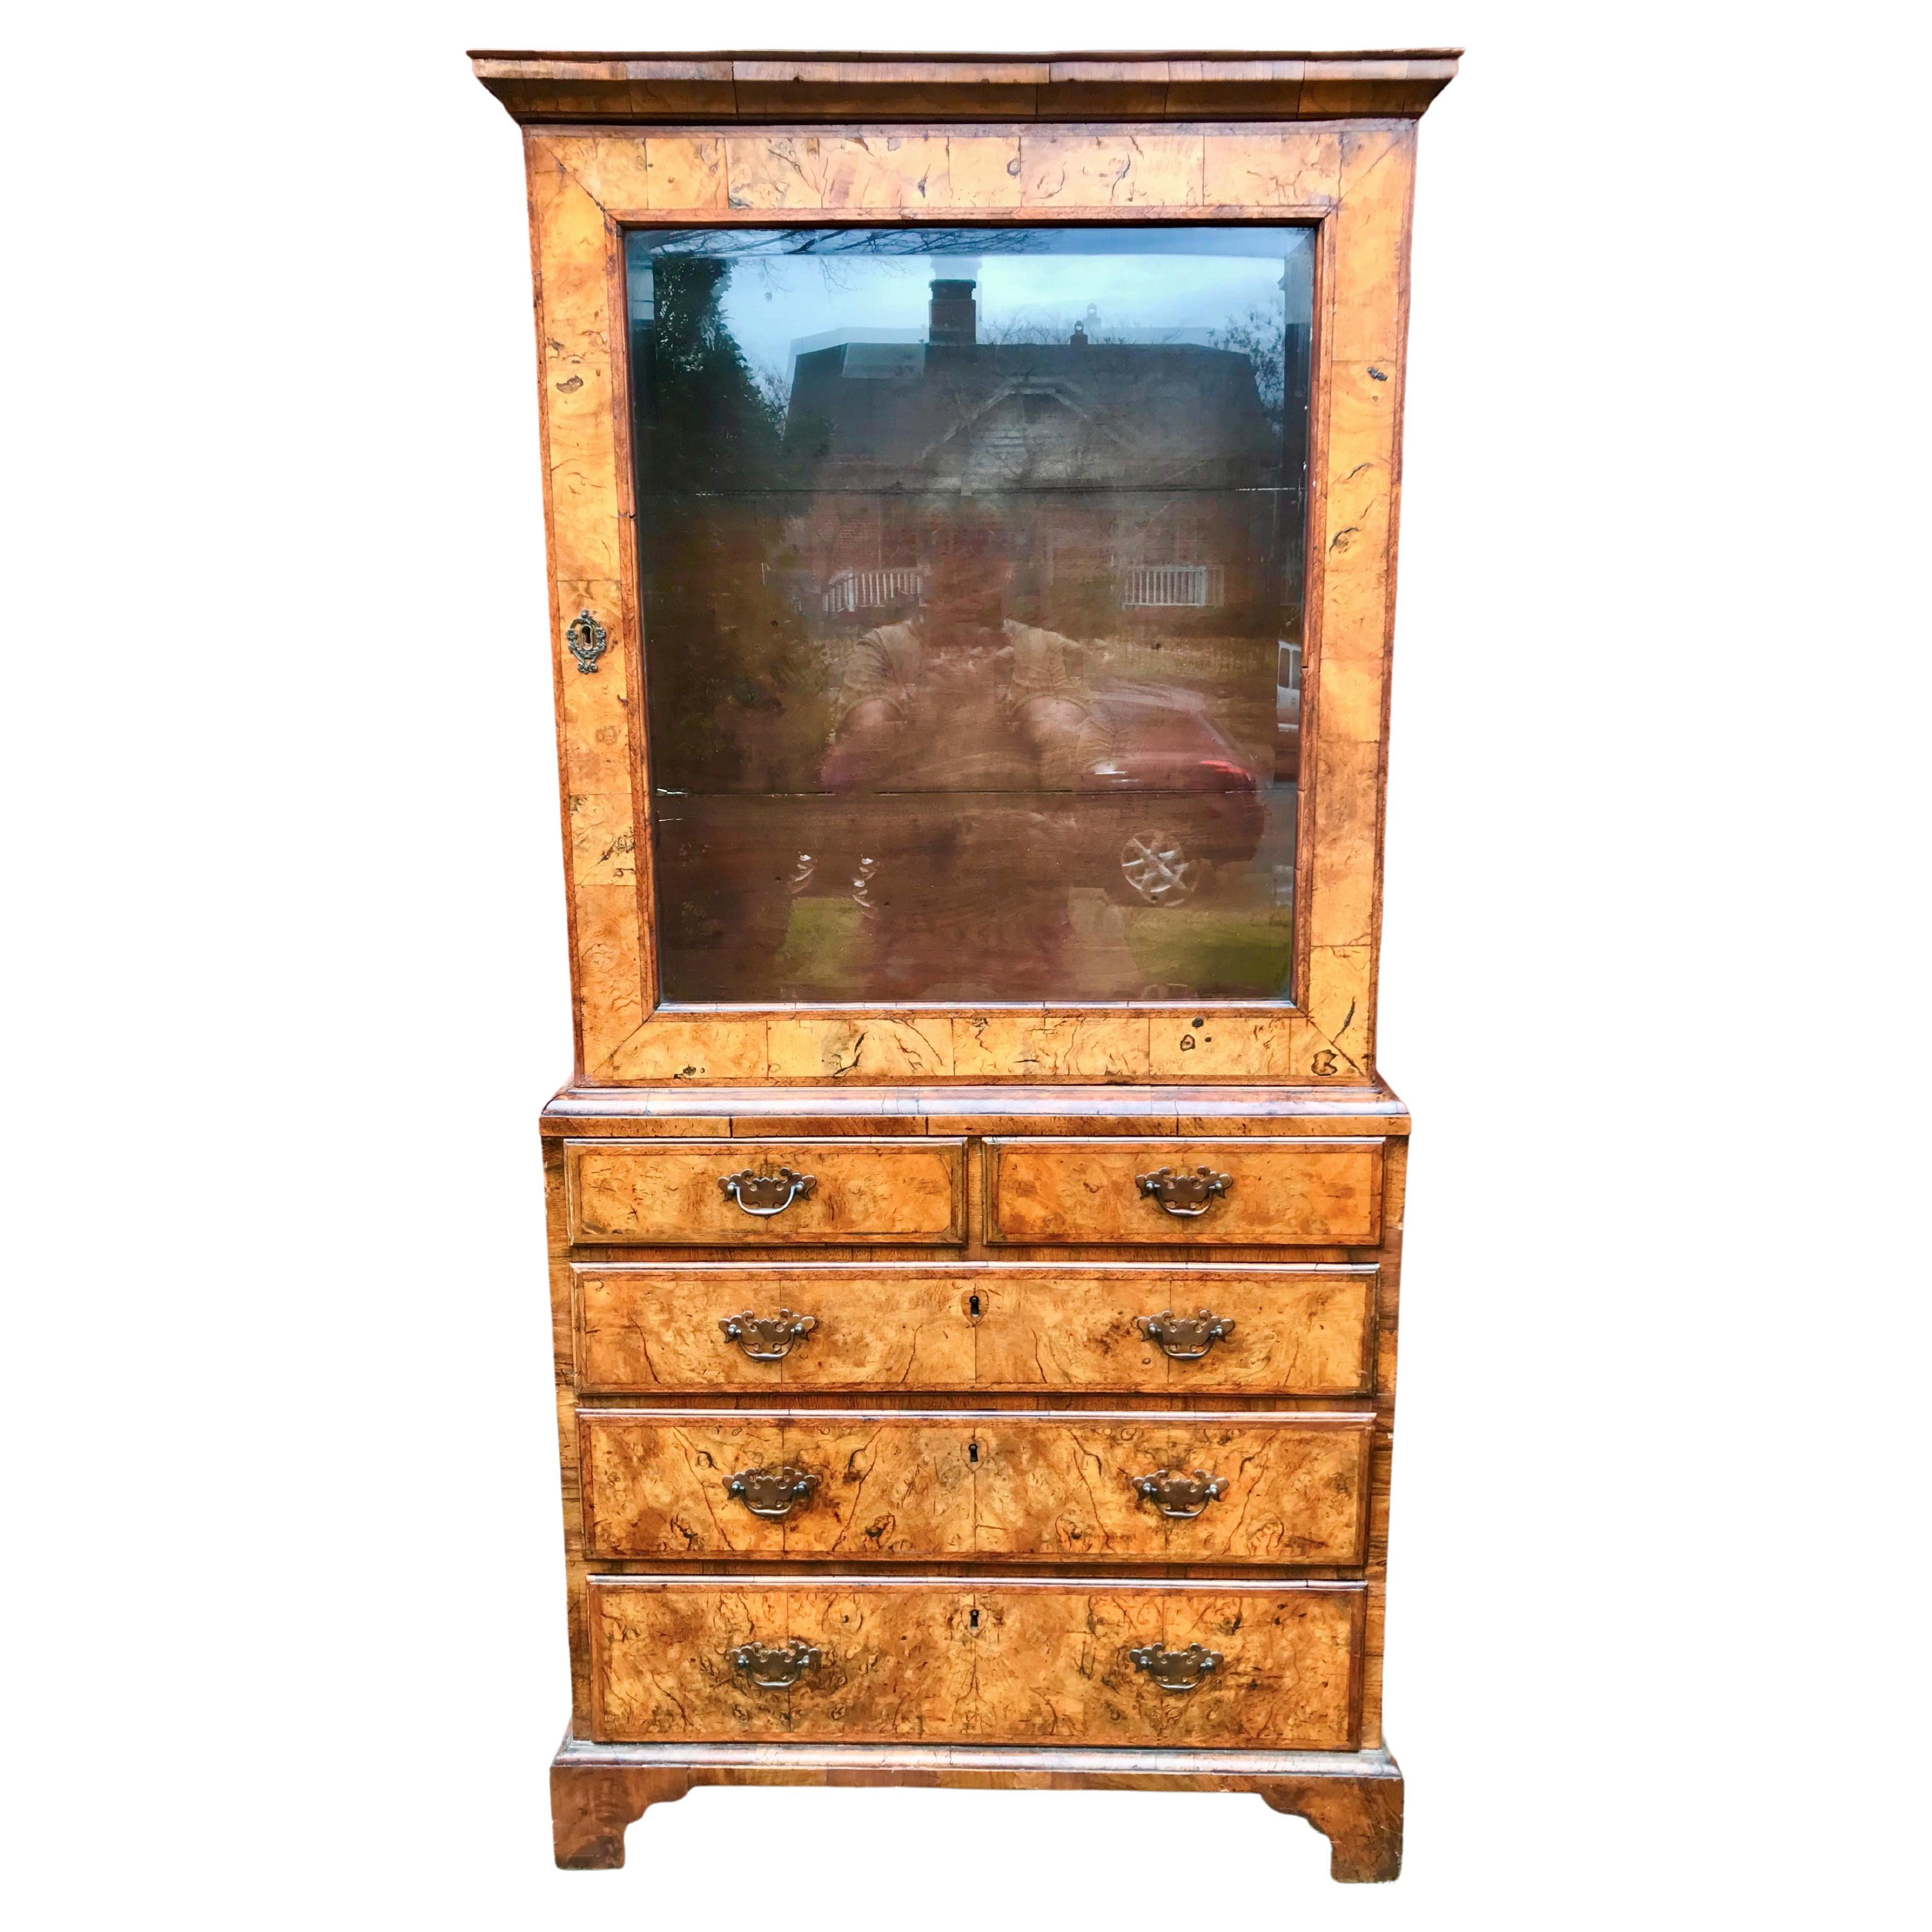 A diminutive bureau bookcase cabinet with stunning veneers /solid walnut boards. Truly pretty faded colors and patina, Mottled fading throughout. Mellow, warm ,faded appeal. Beveled glass door. Rare small size, basically a book cabinet on a walnut